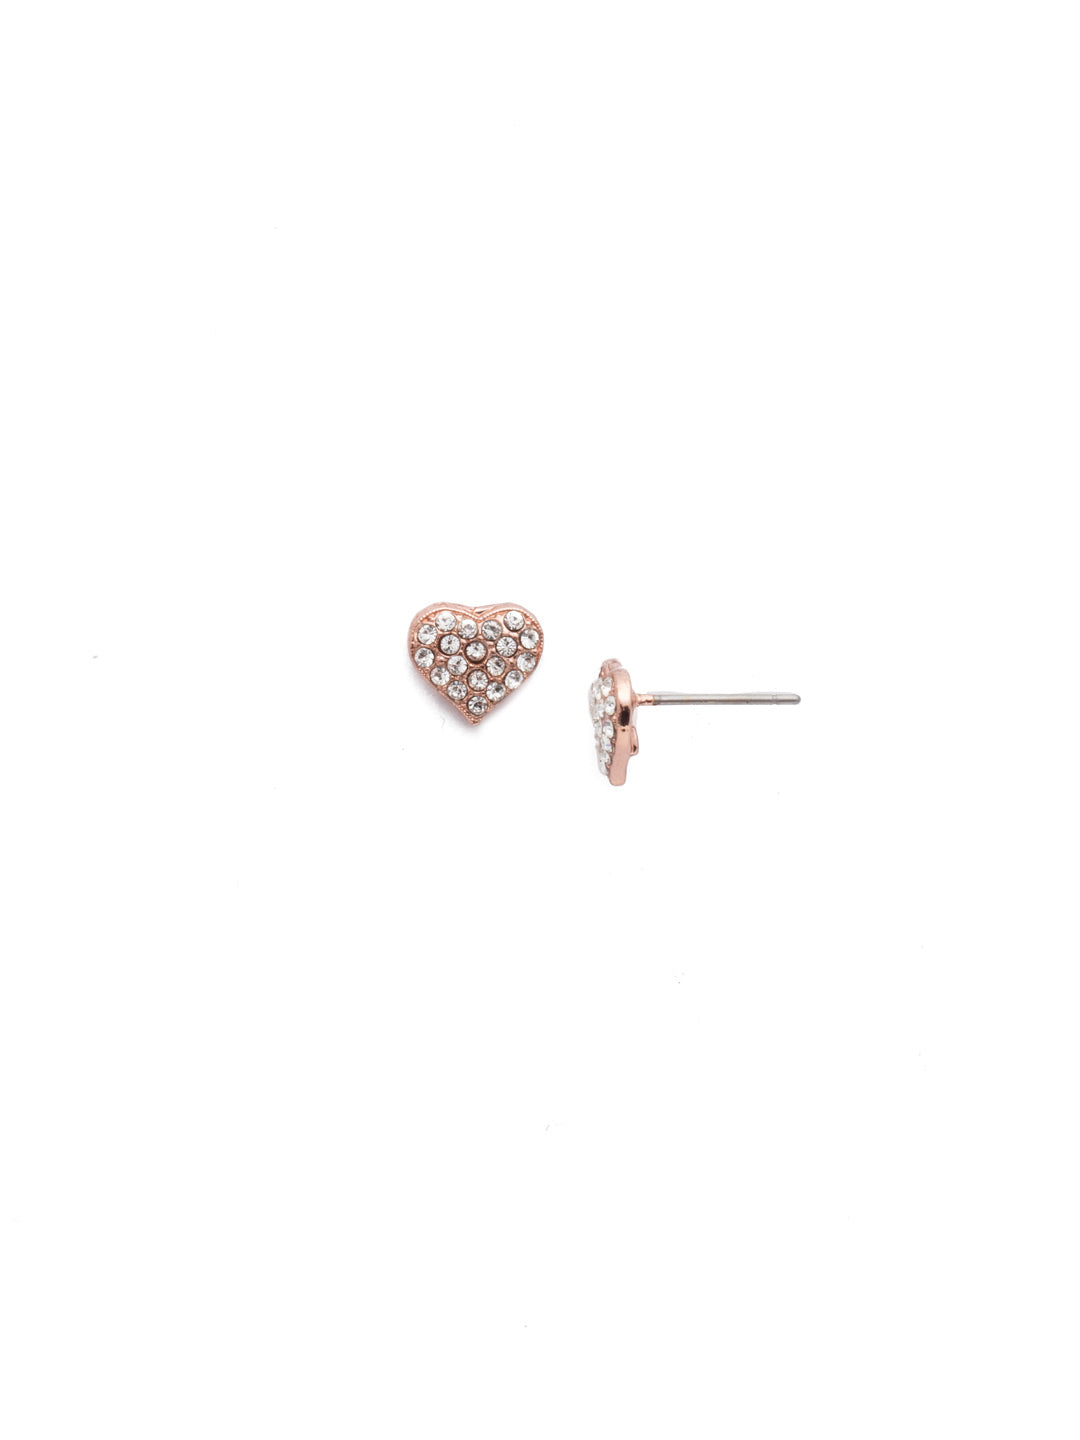 Pavé Diamond Heart Stud Earrings 18K Gold | THE PRIVATE ROOM JEWELRY – The  Private Room - Fine Jewelry